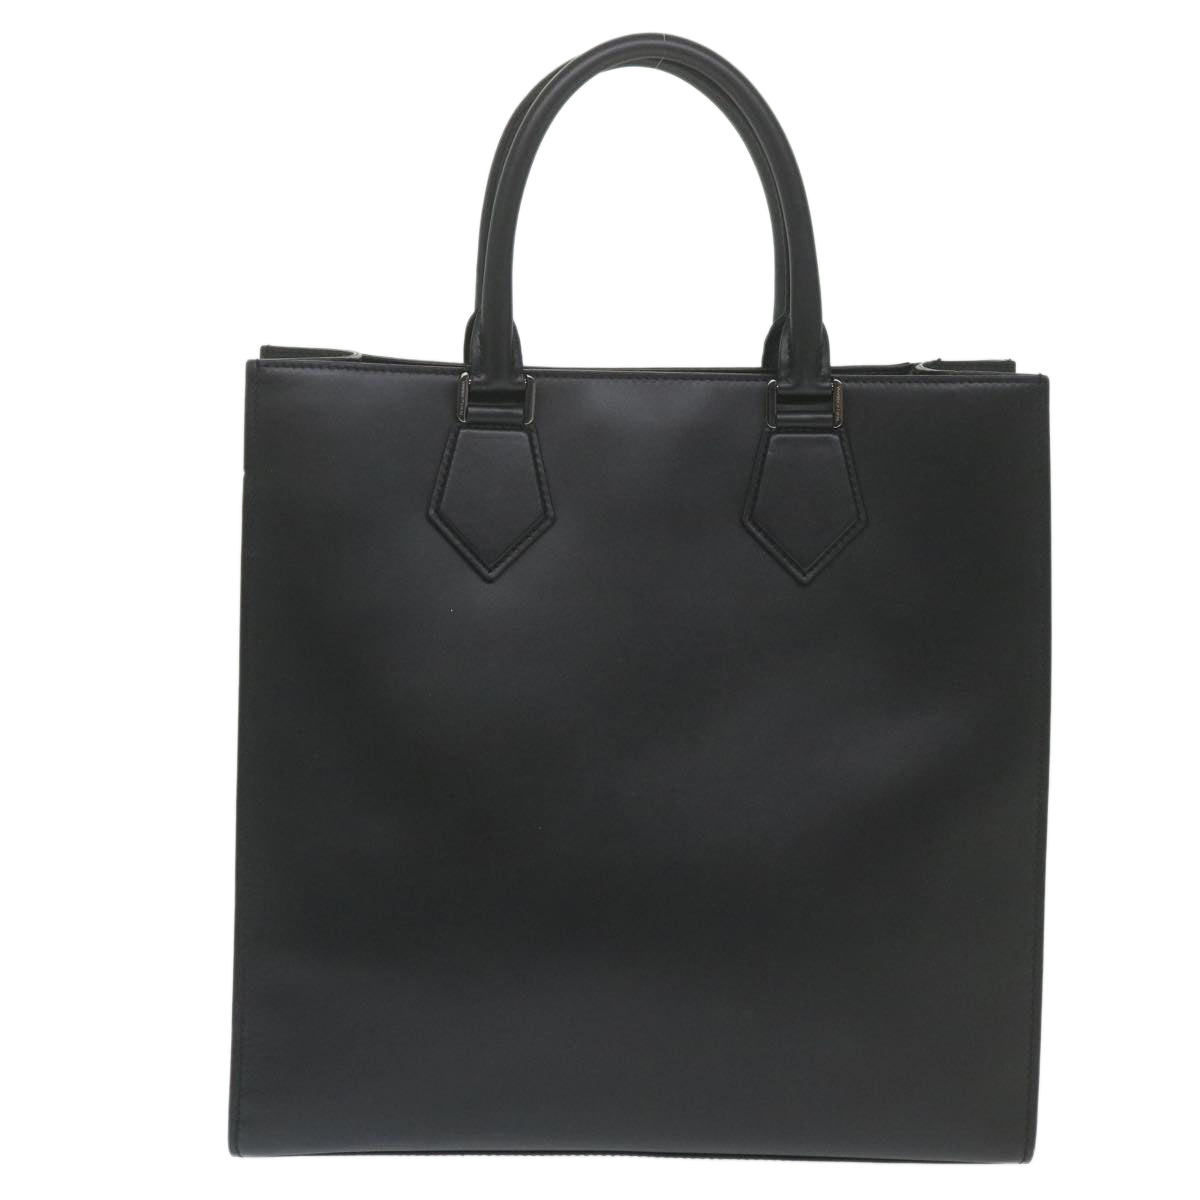 DOLCE&GABBANA Tote Bag Calf leather 2way Black Auth bs10232